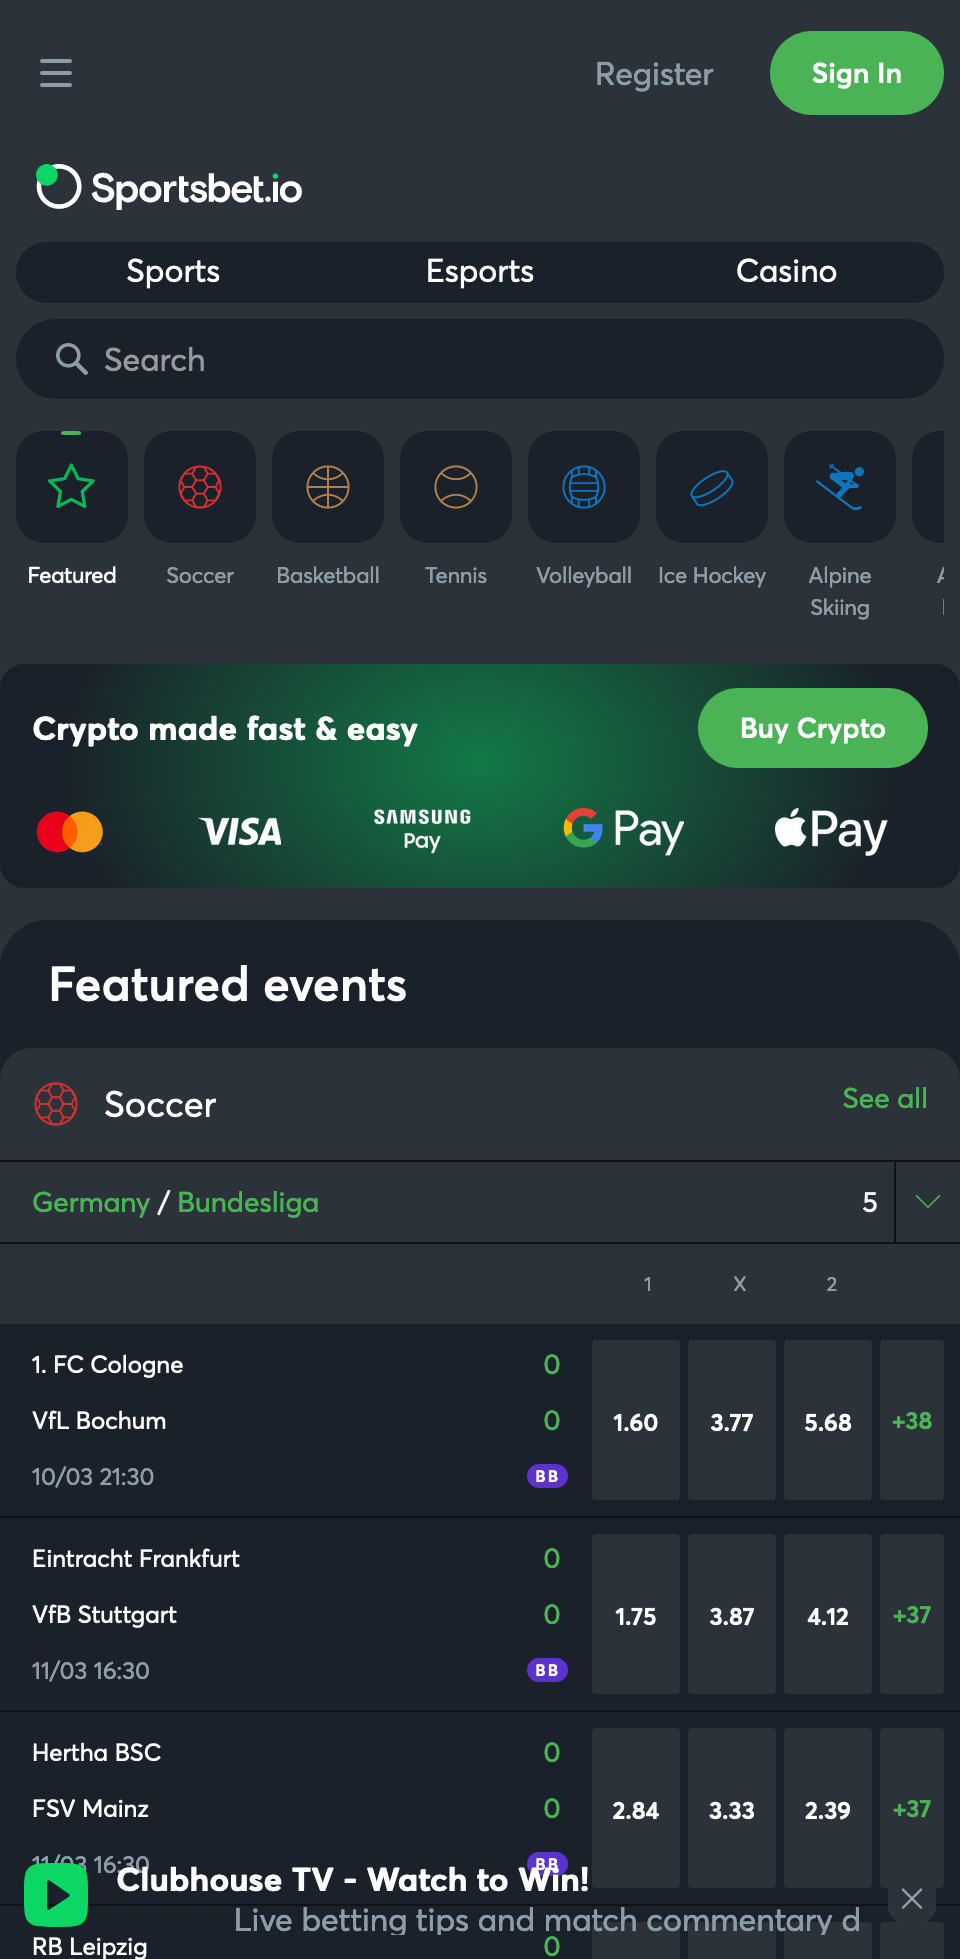 The start page of the Sportsbet app displays top events, popular matches and interesting games